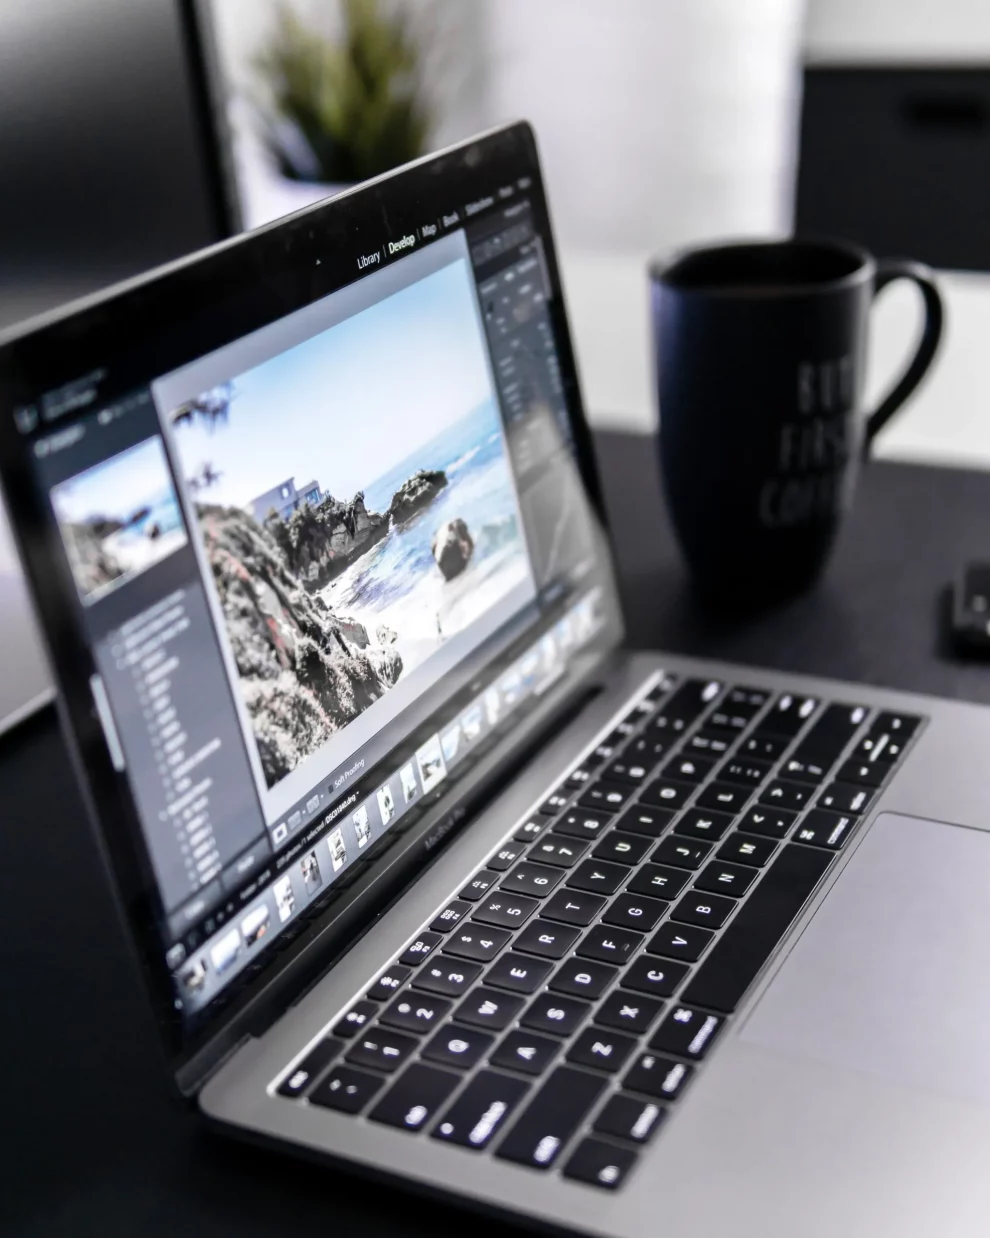 5 Basic Photo Editing Tips for Beginners